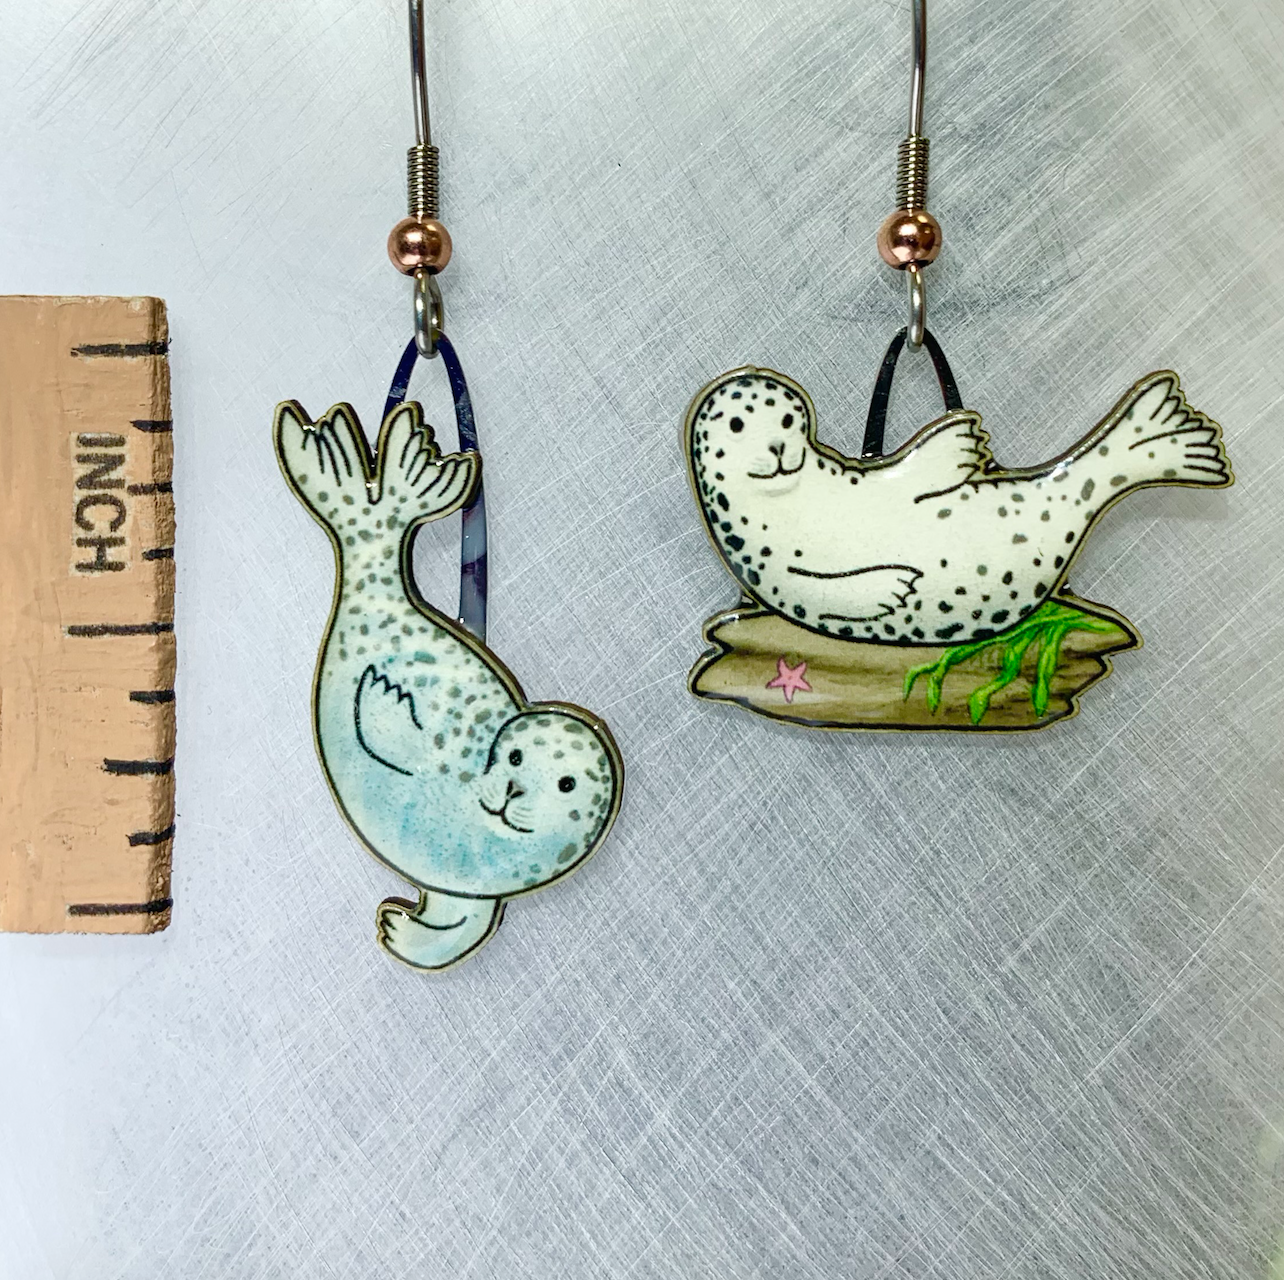 Picture shown is of 1 inch tall pair of earrings of the marine animal the Harbor Seal.